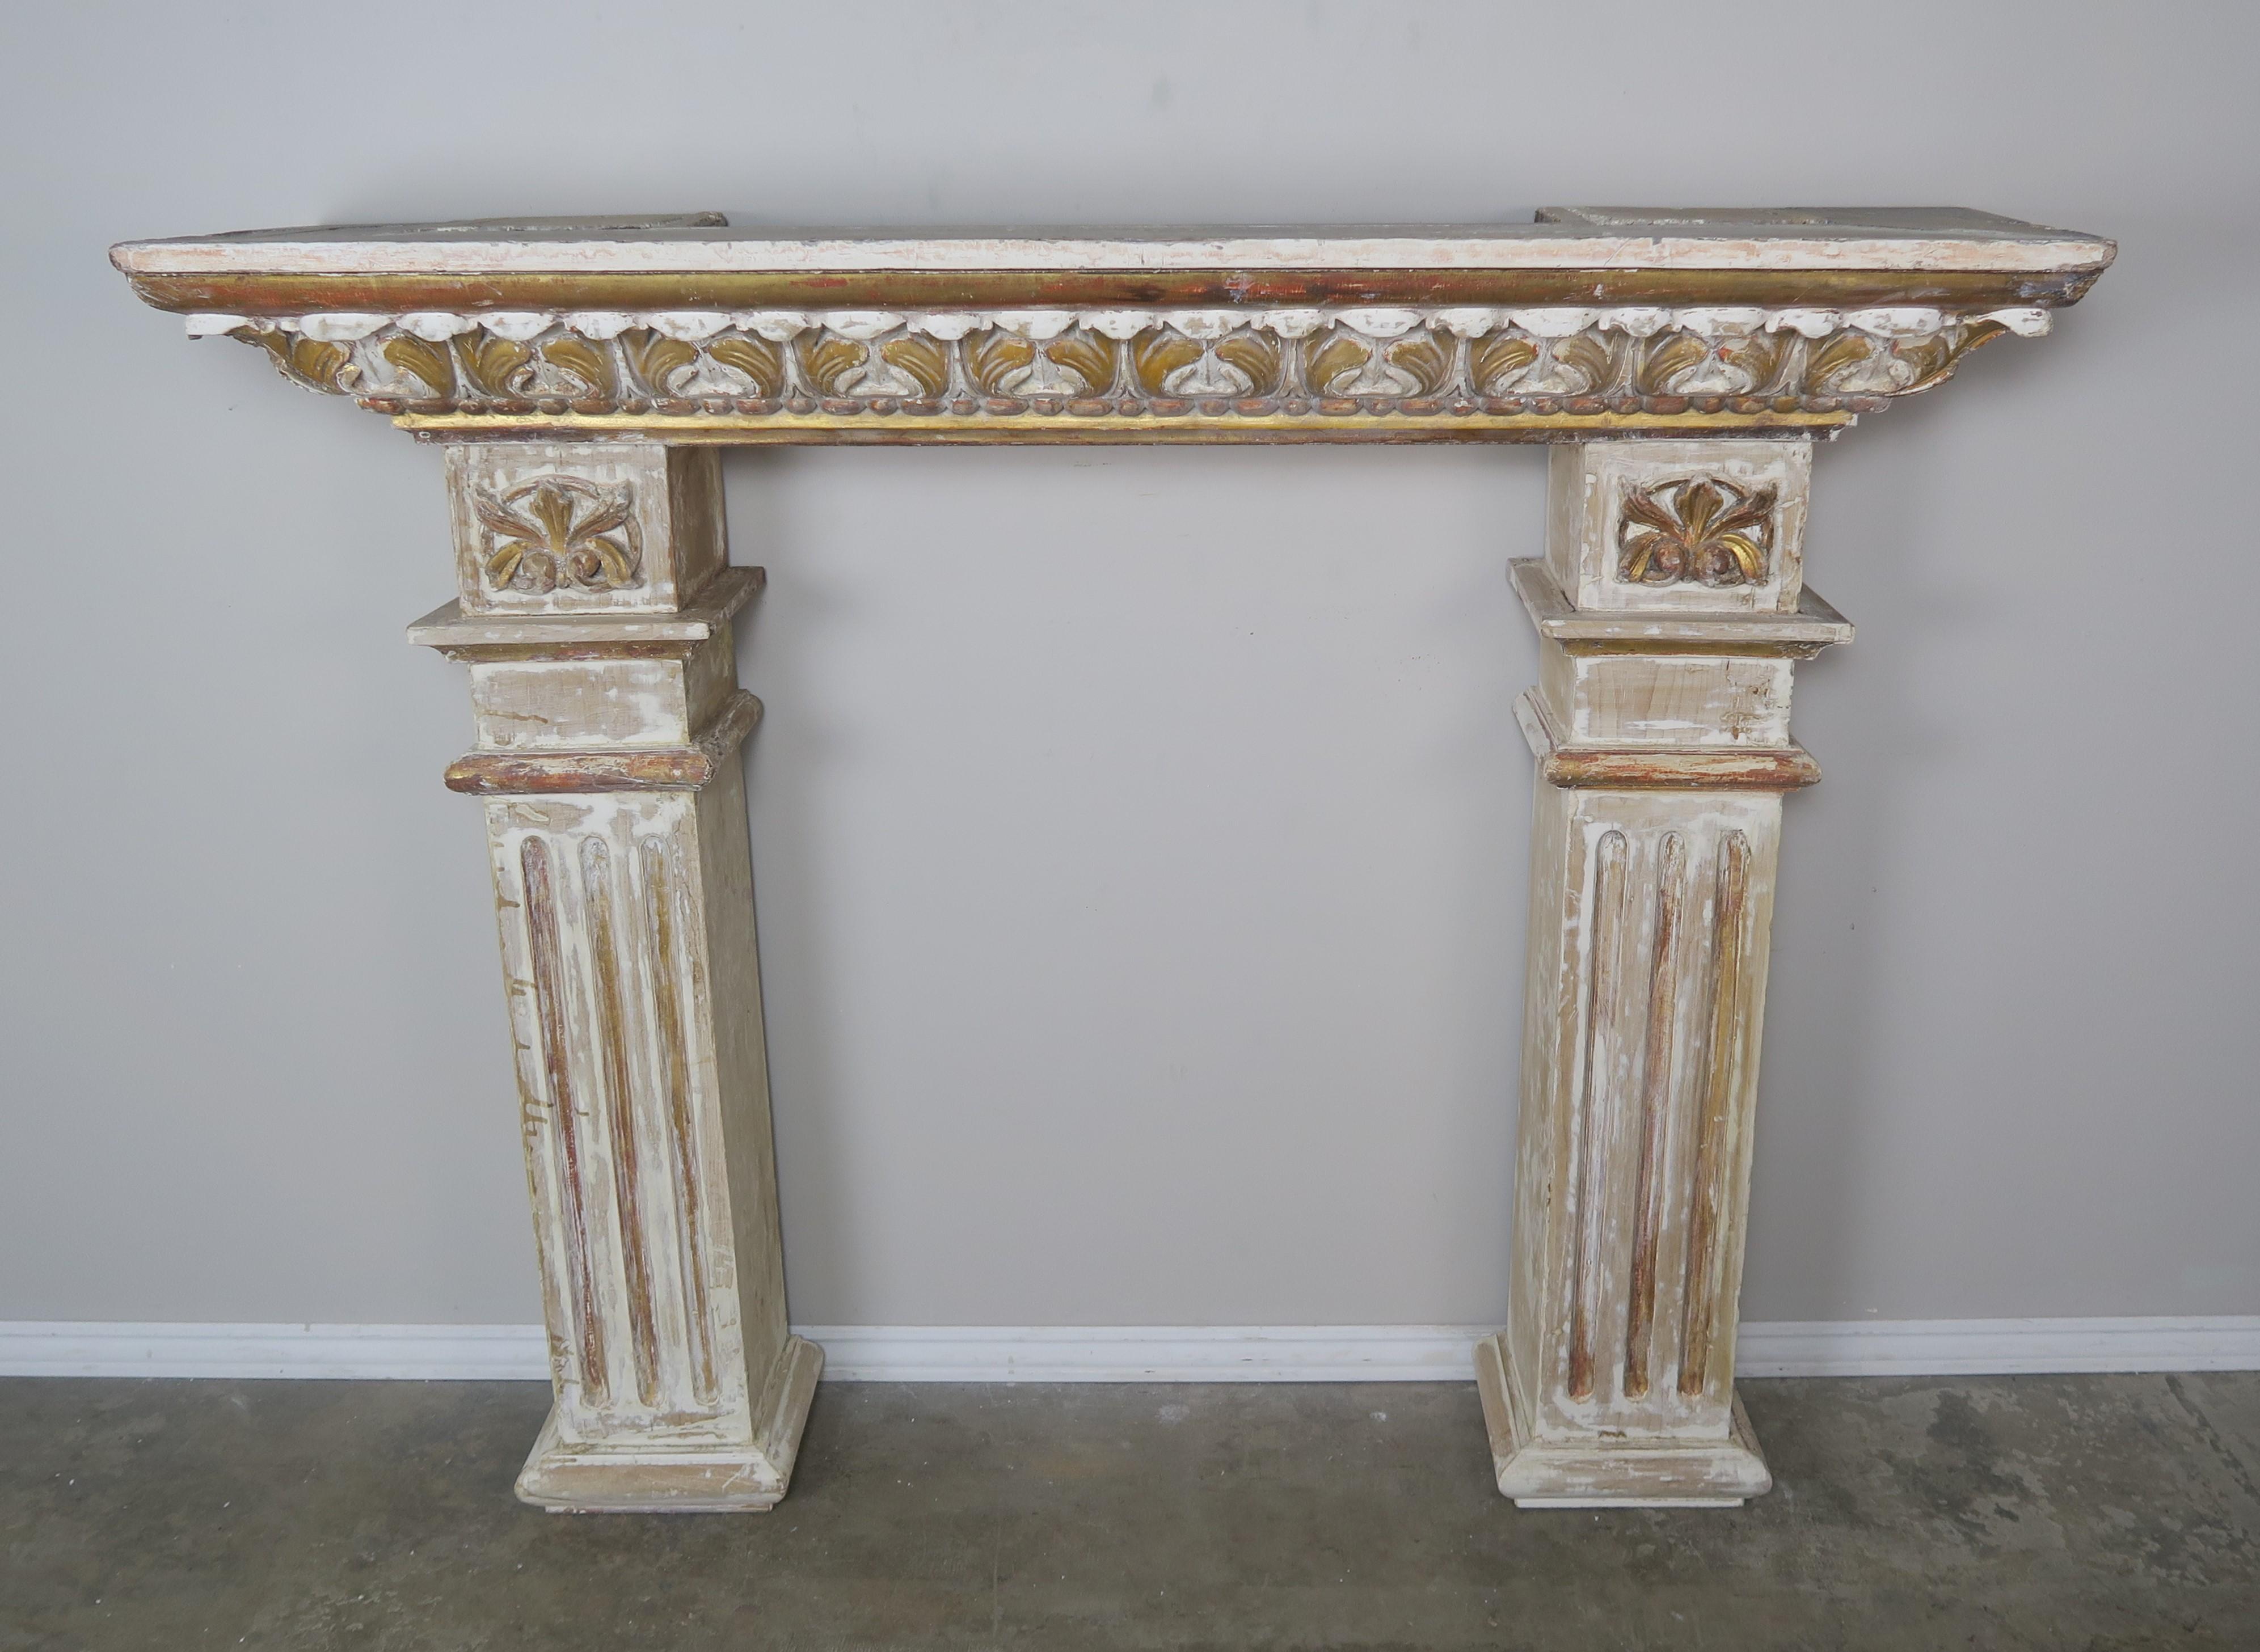 19th century Italian neoclassical style painted and parcel gilt carved wood fireplace mantel. Carved acanthus leaf detail across the top of the piece. Worn painted finish with highlights of gold leaf throughout.
 